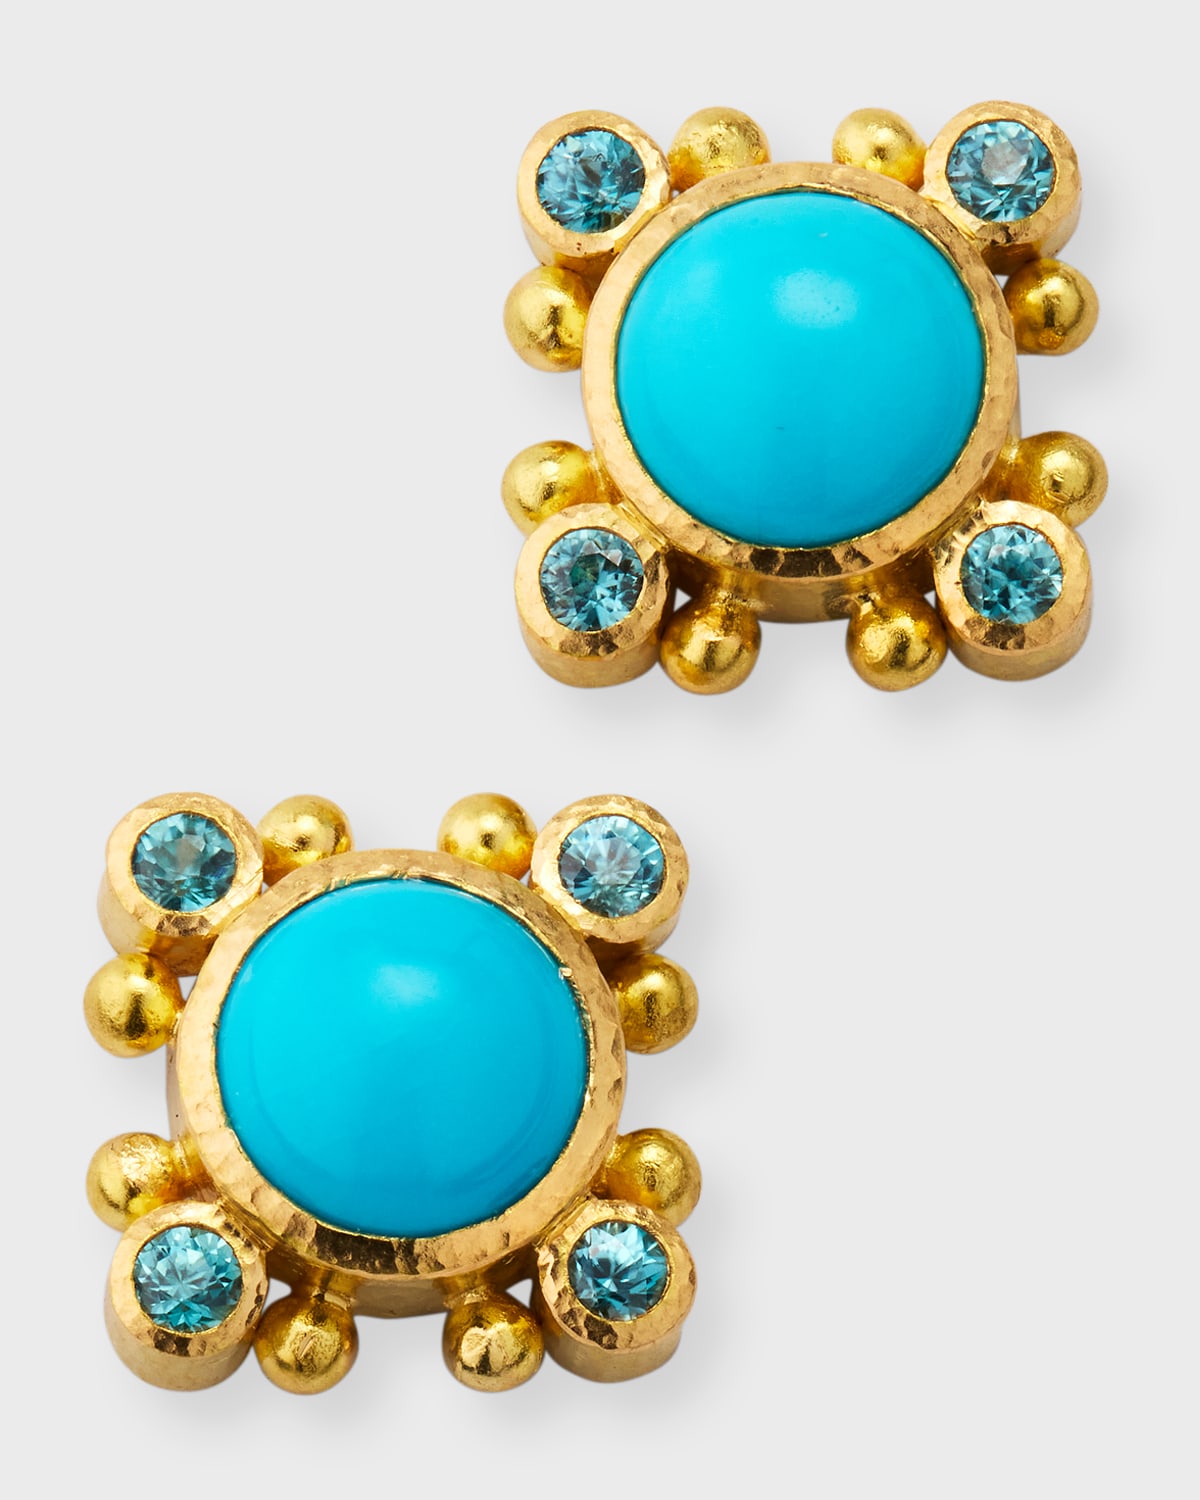 19K Round Turquoise Stud Earrings with Blue Zircon